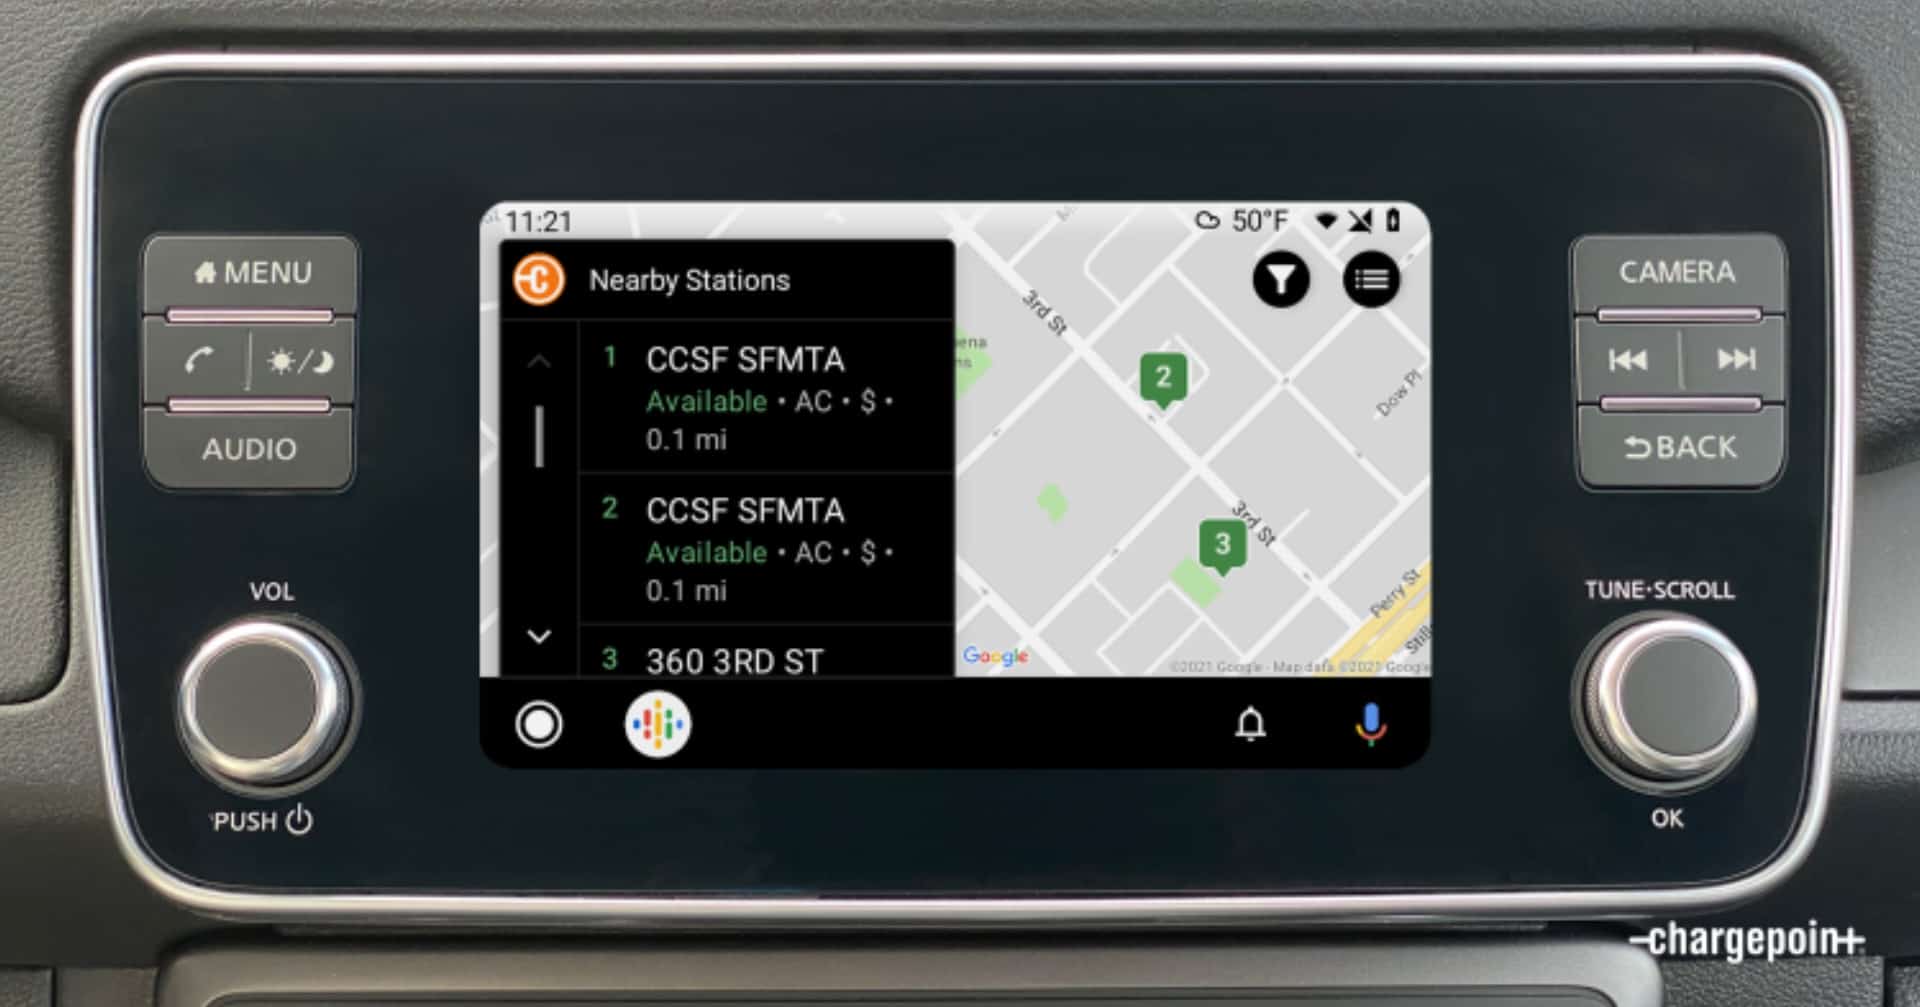 ChargePoint Adds Android Auto Support for Finding Nearby EV Chargers